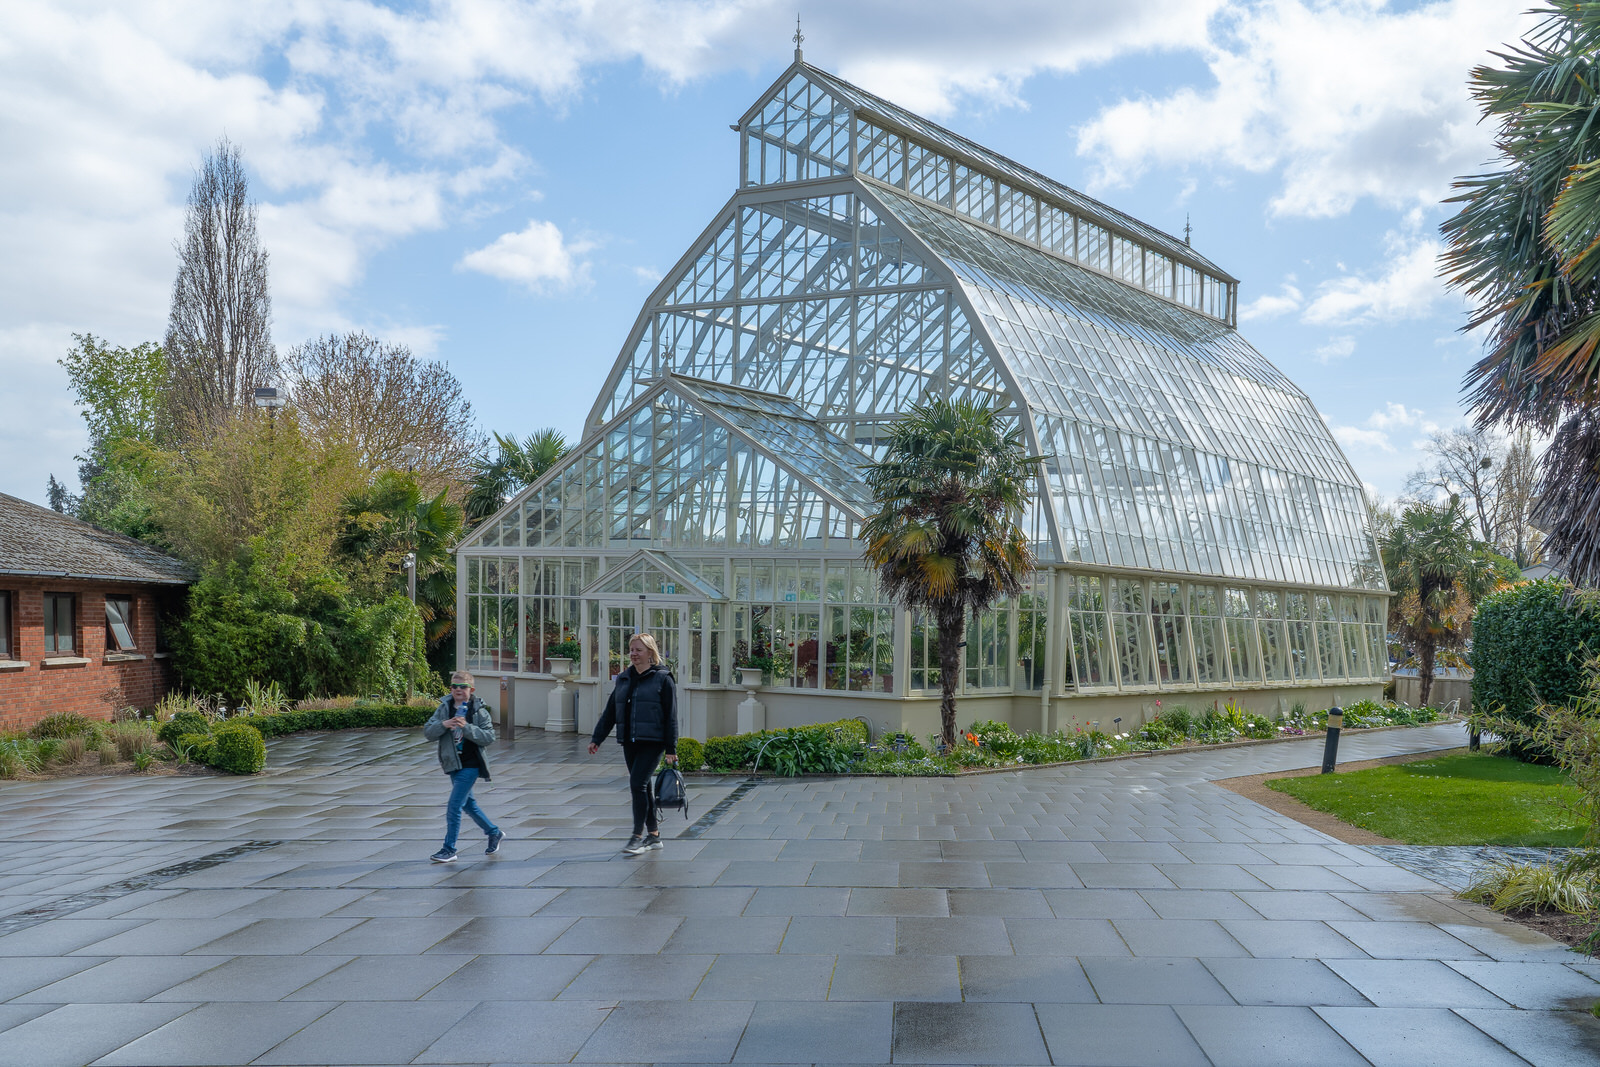 SOME OF THE GLASSHOUSES IN THE BOTANIC GARDENS